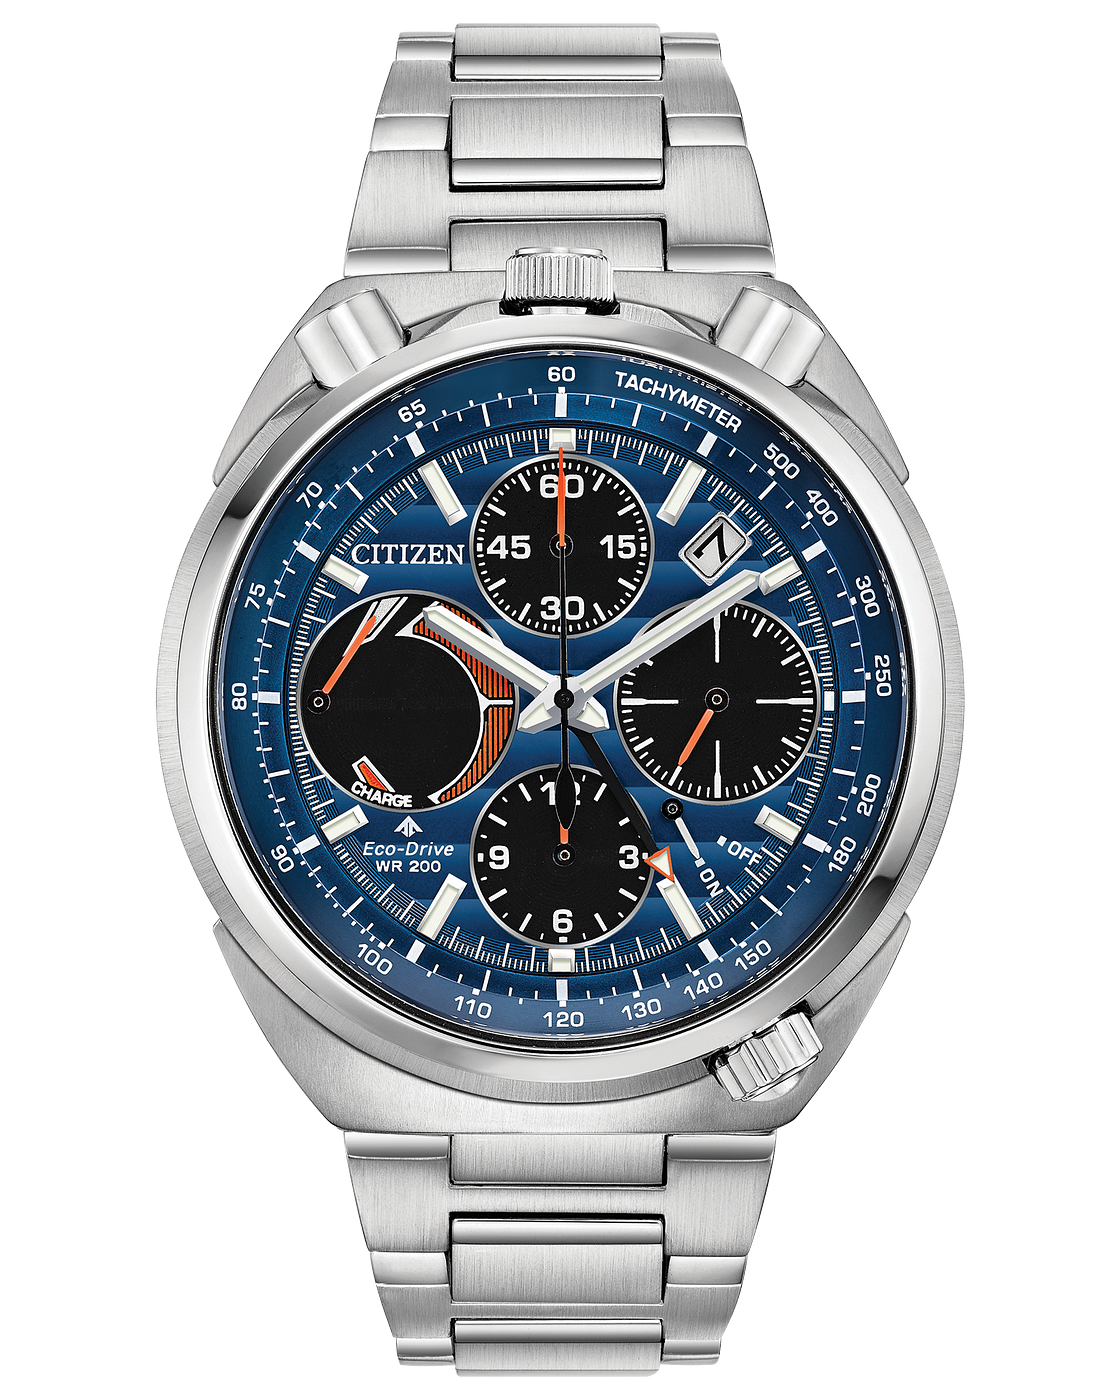 Citizen AV0070-57L Promaster Eco-Drive Tsuno Chronograph Racer 45mm blue dial Anti-reflective sapphire crystal Alarm Tachymeter 200m WR stainless steel strap Men's sports watch